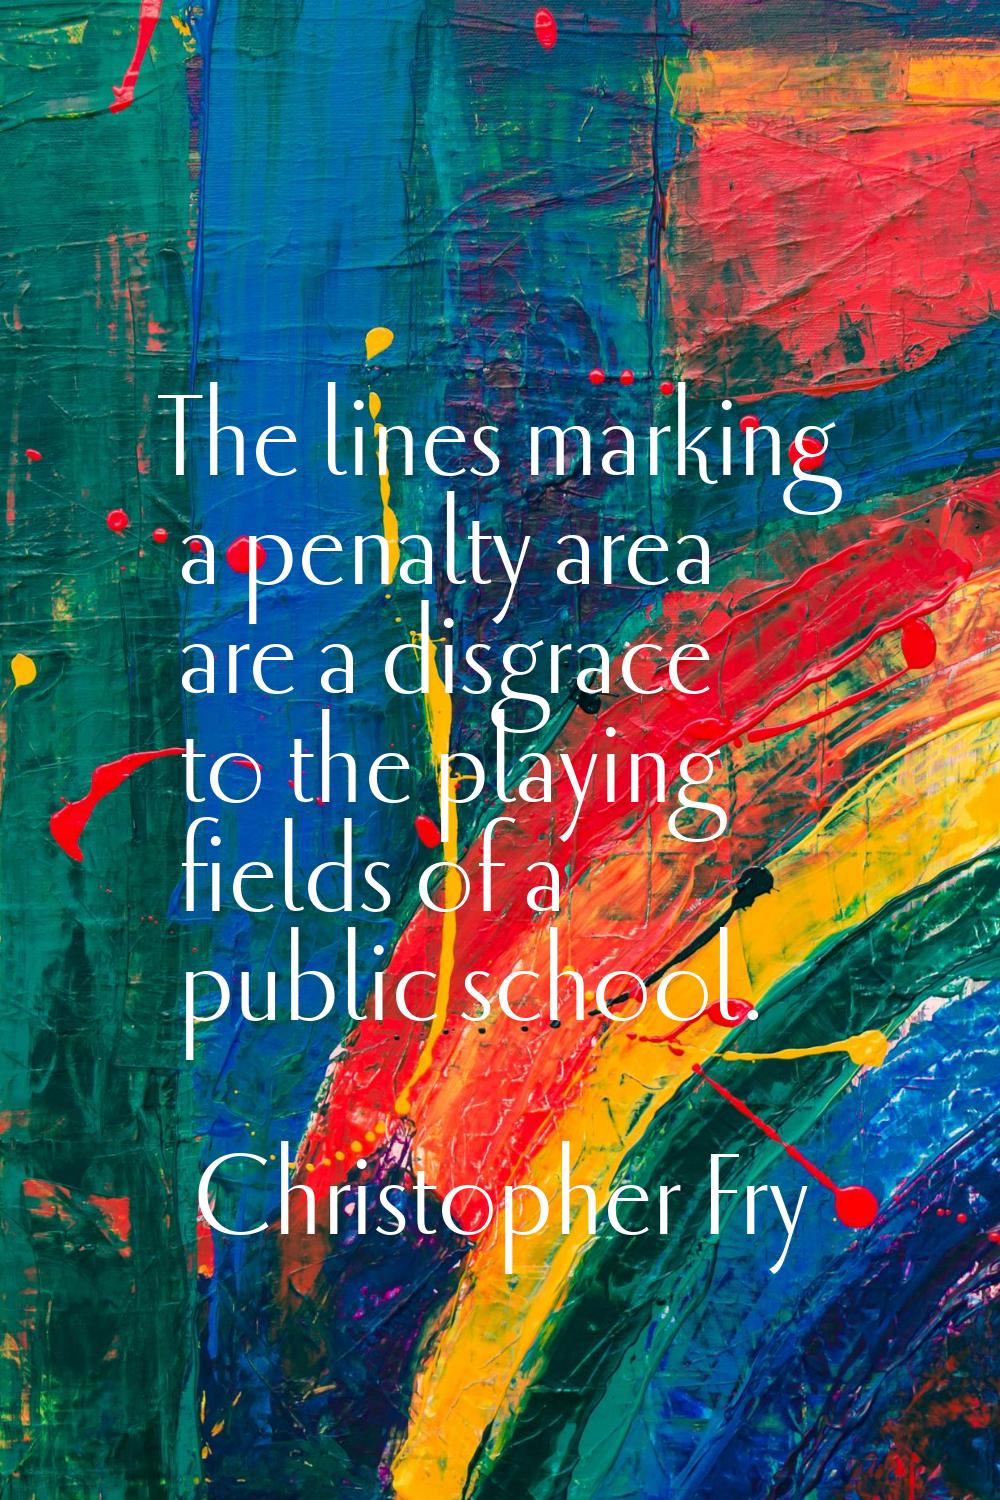 The lines marking a penalty area are a disgrace to the playing fields of a public school.